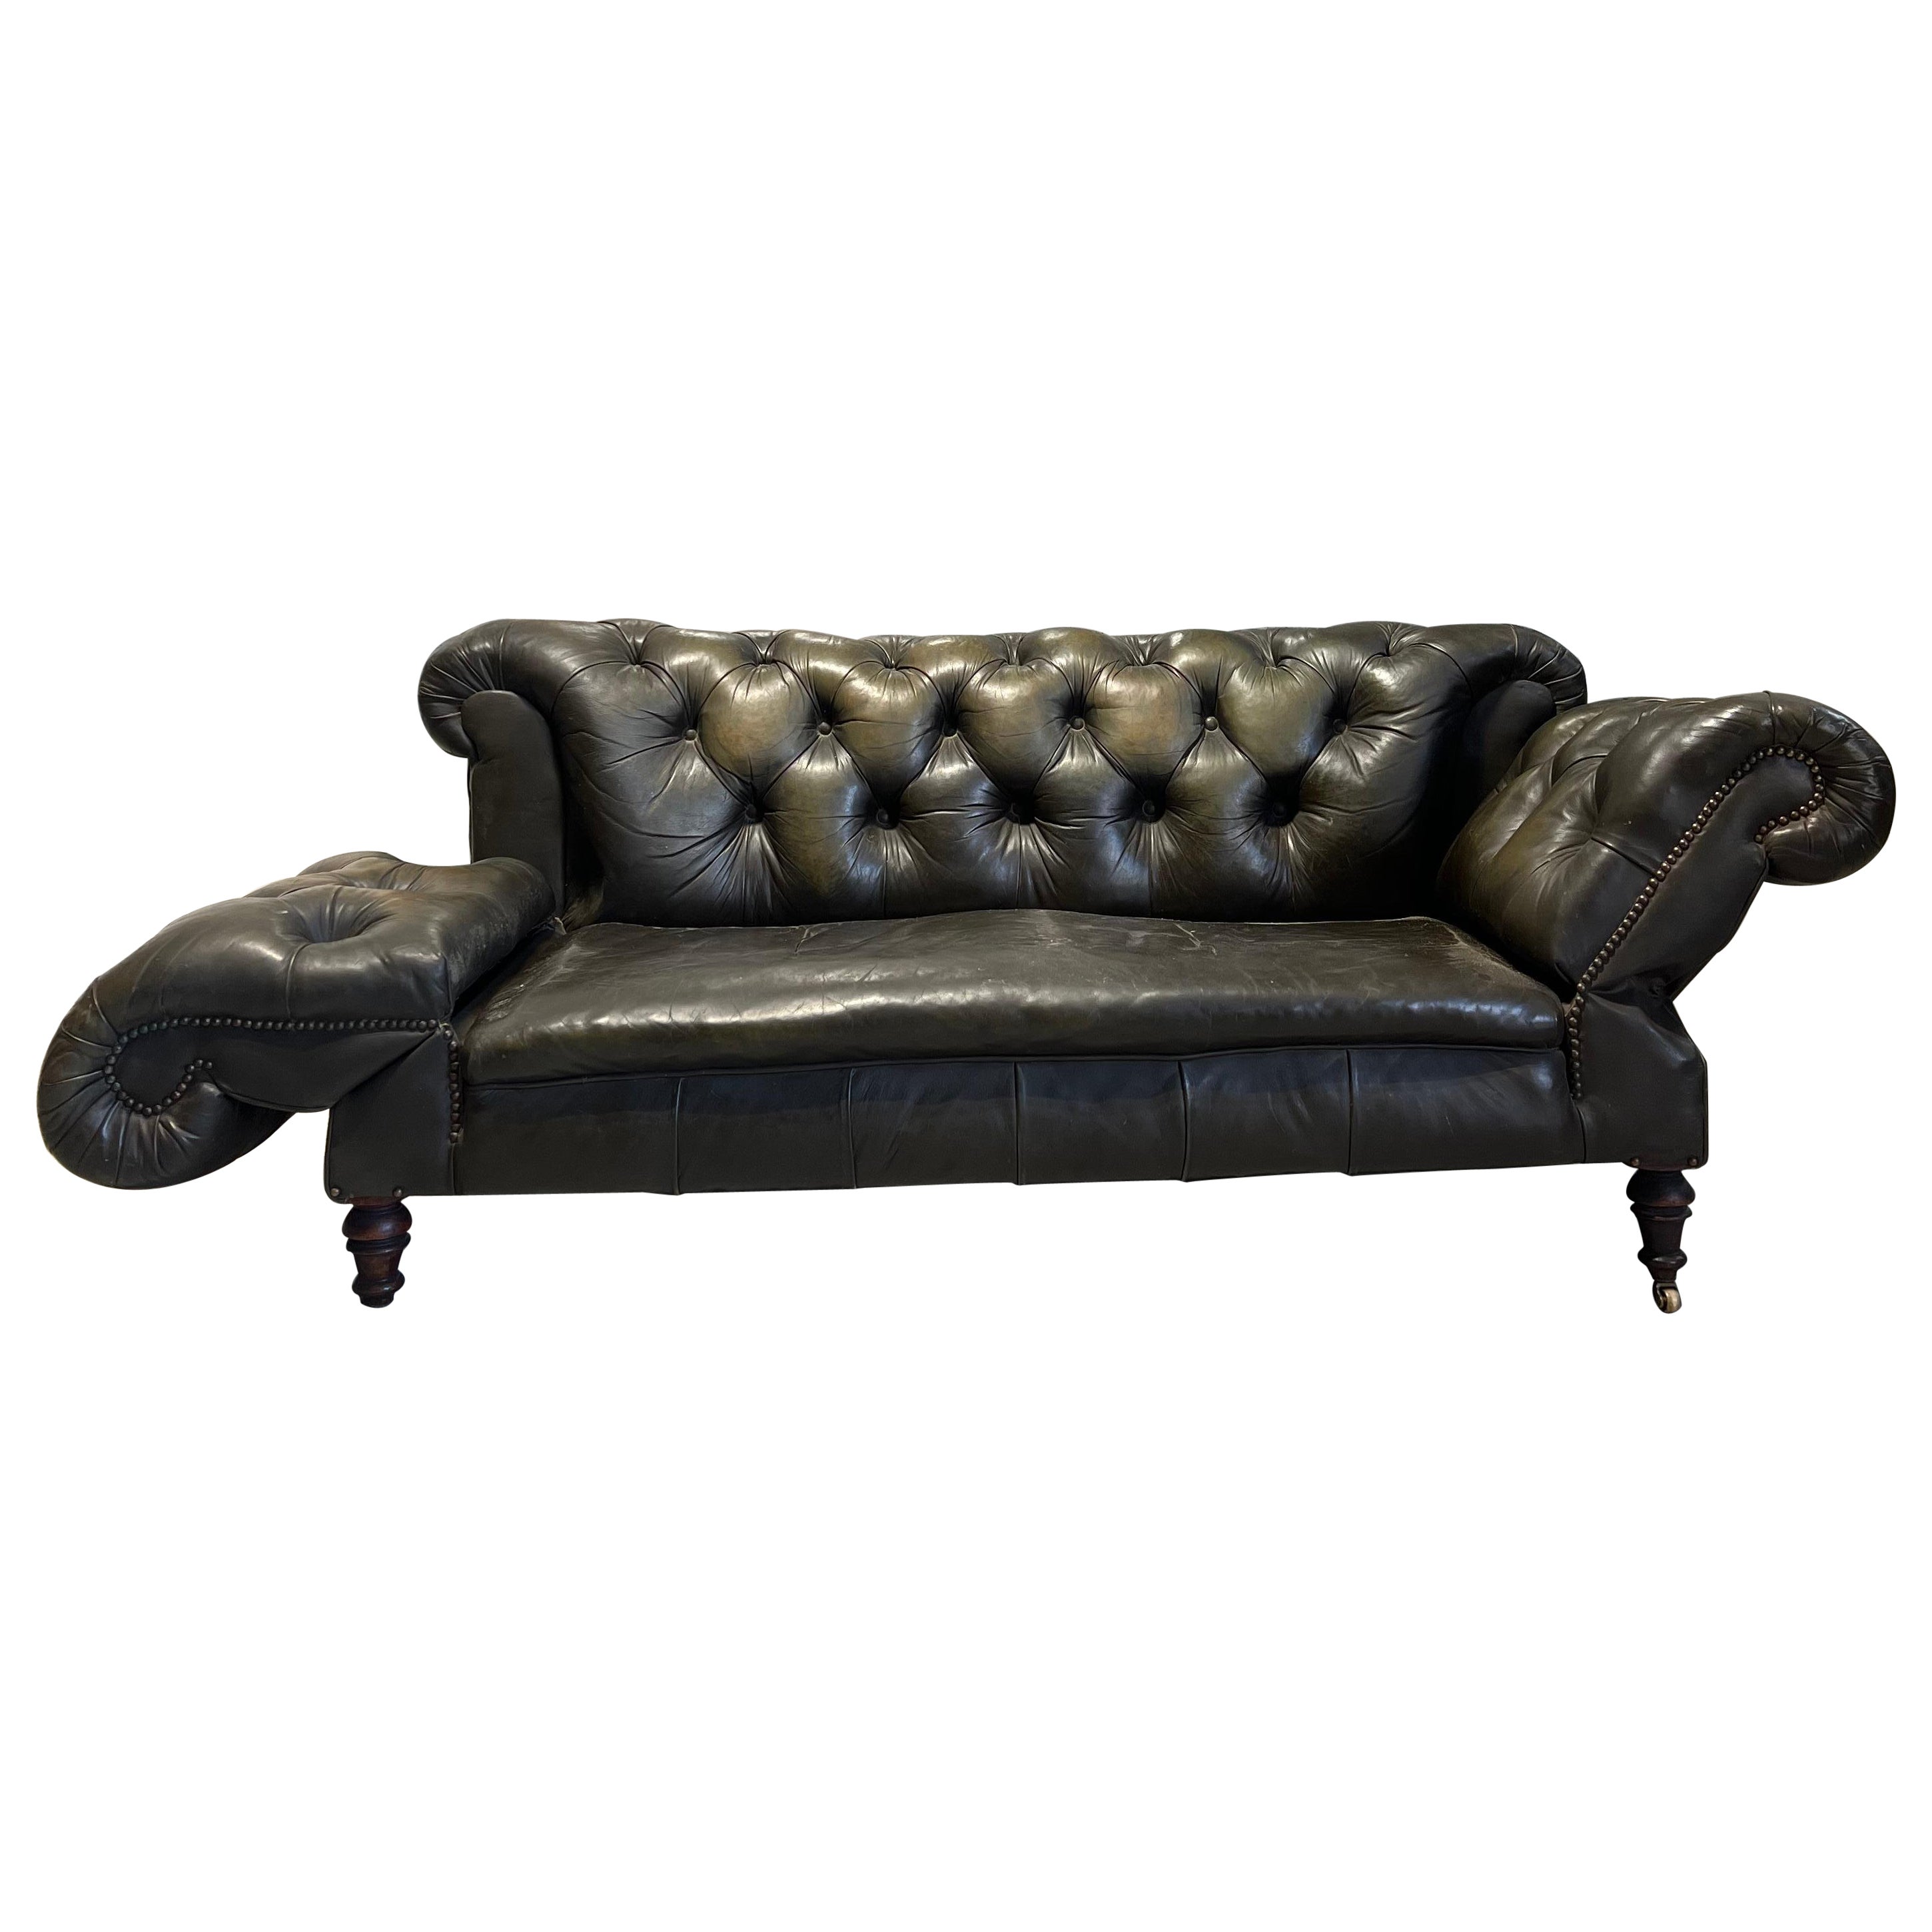 Antique 19thC Chesterfield Sofa in Beautiful Patinated Leather For Sale